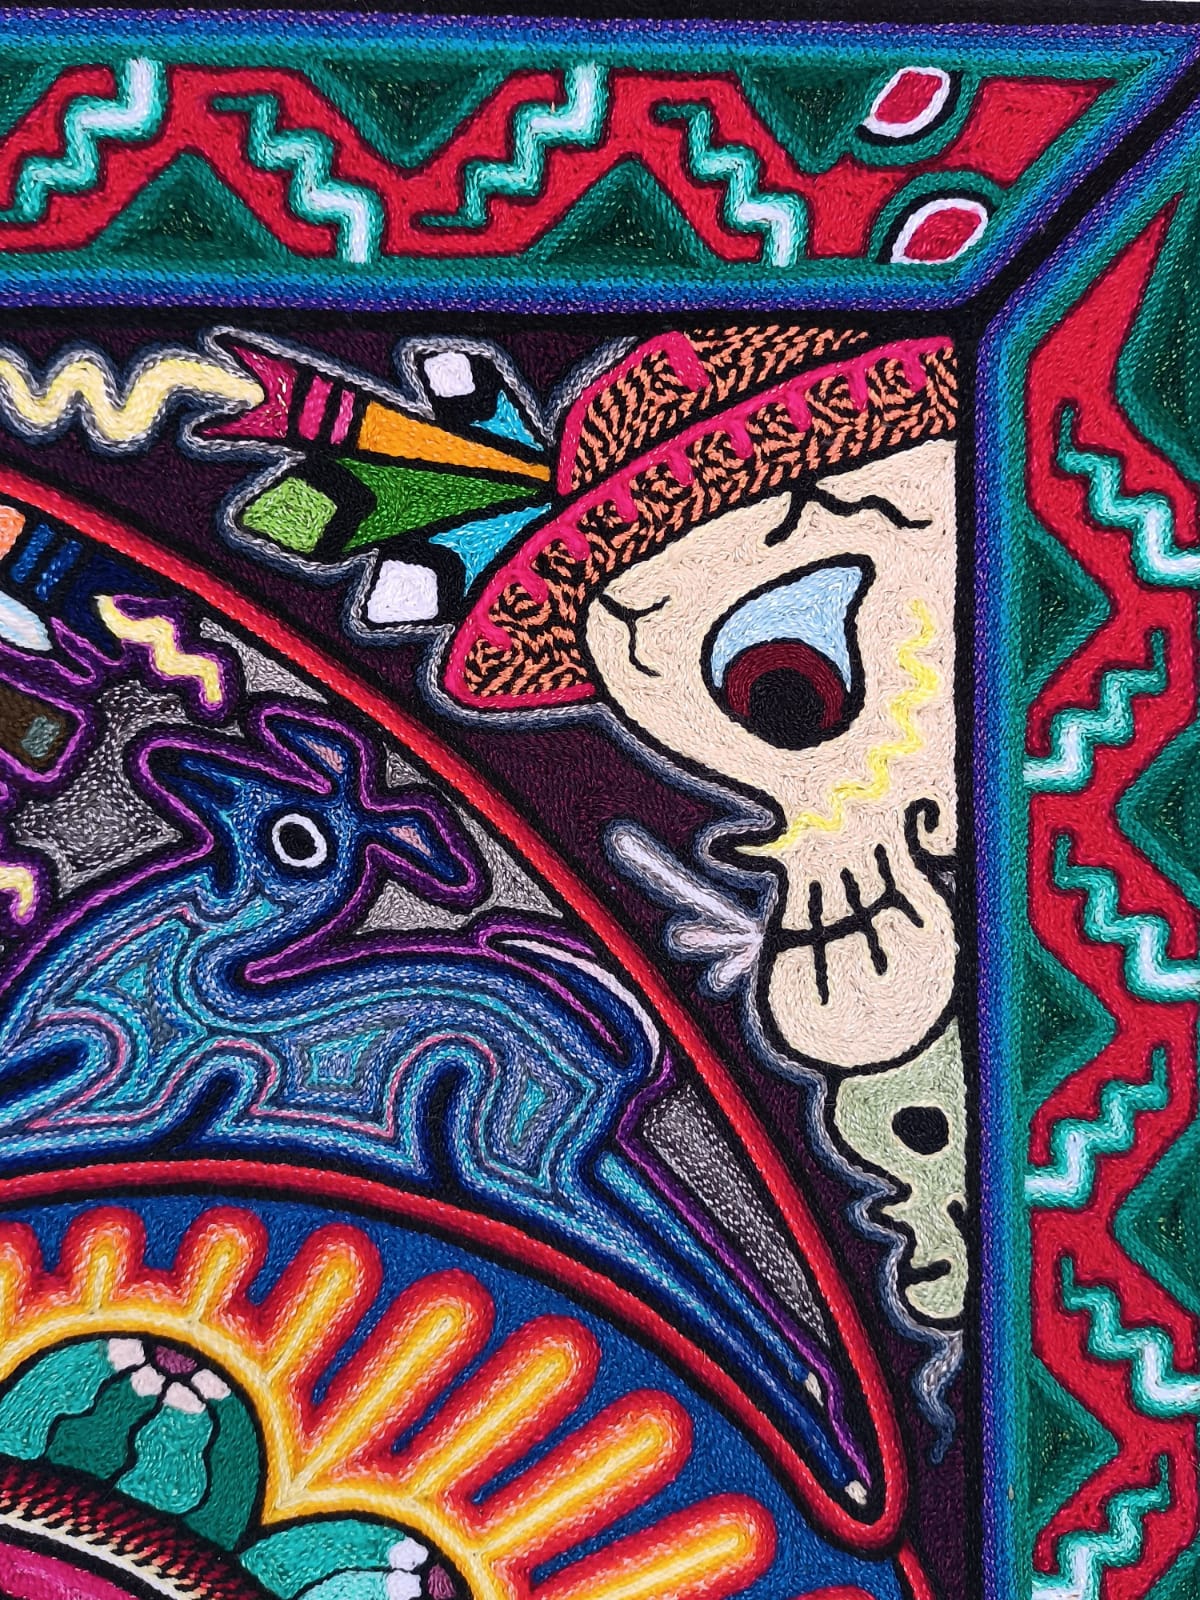 Huichol Indian Yarn Painting by  Luis Castro PP6180